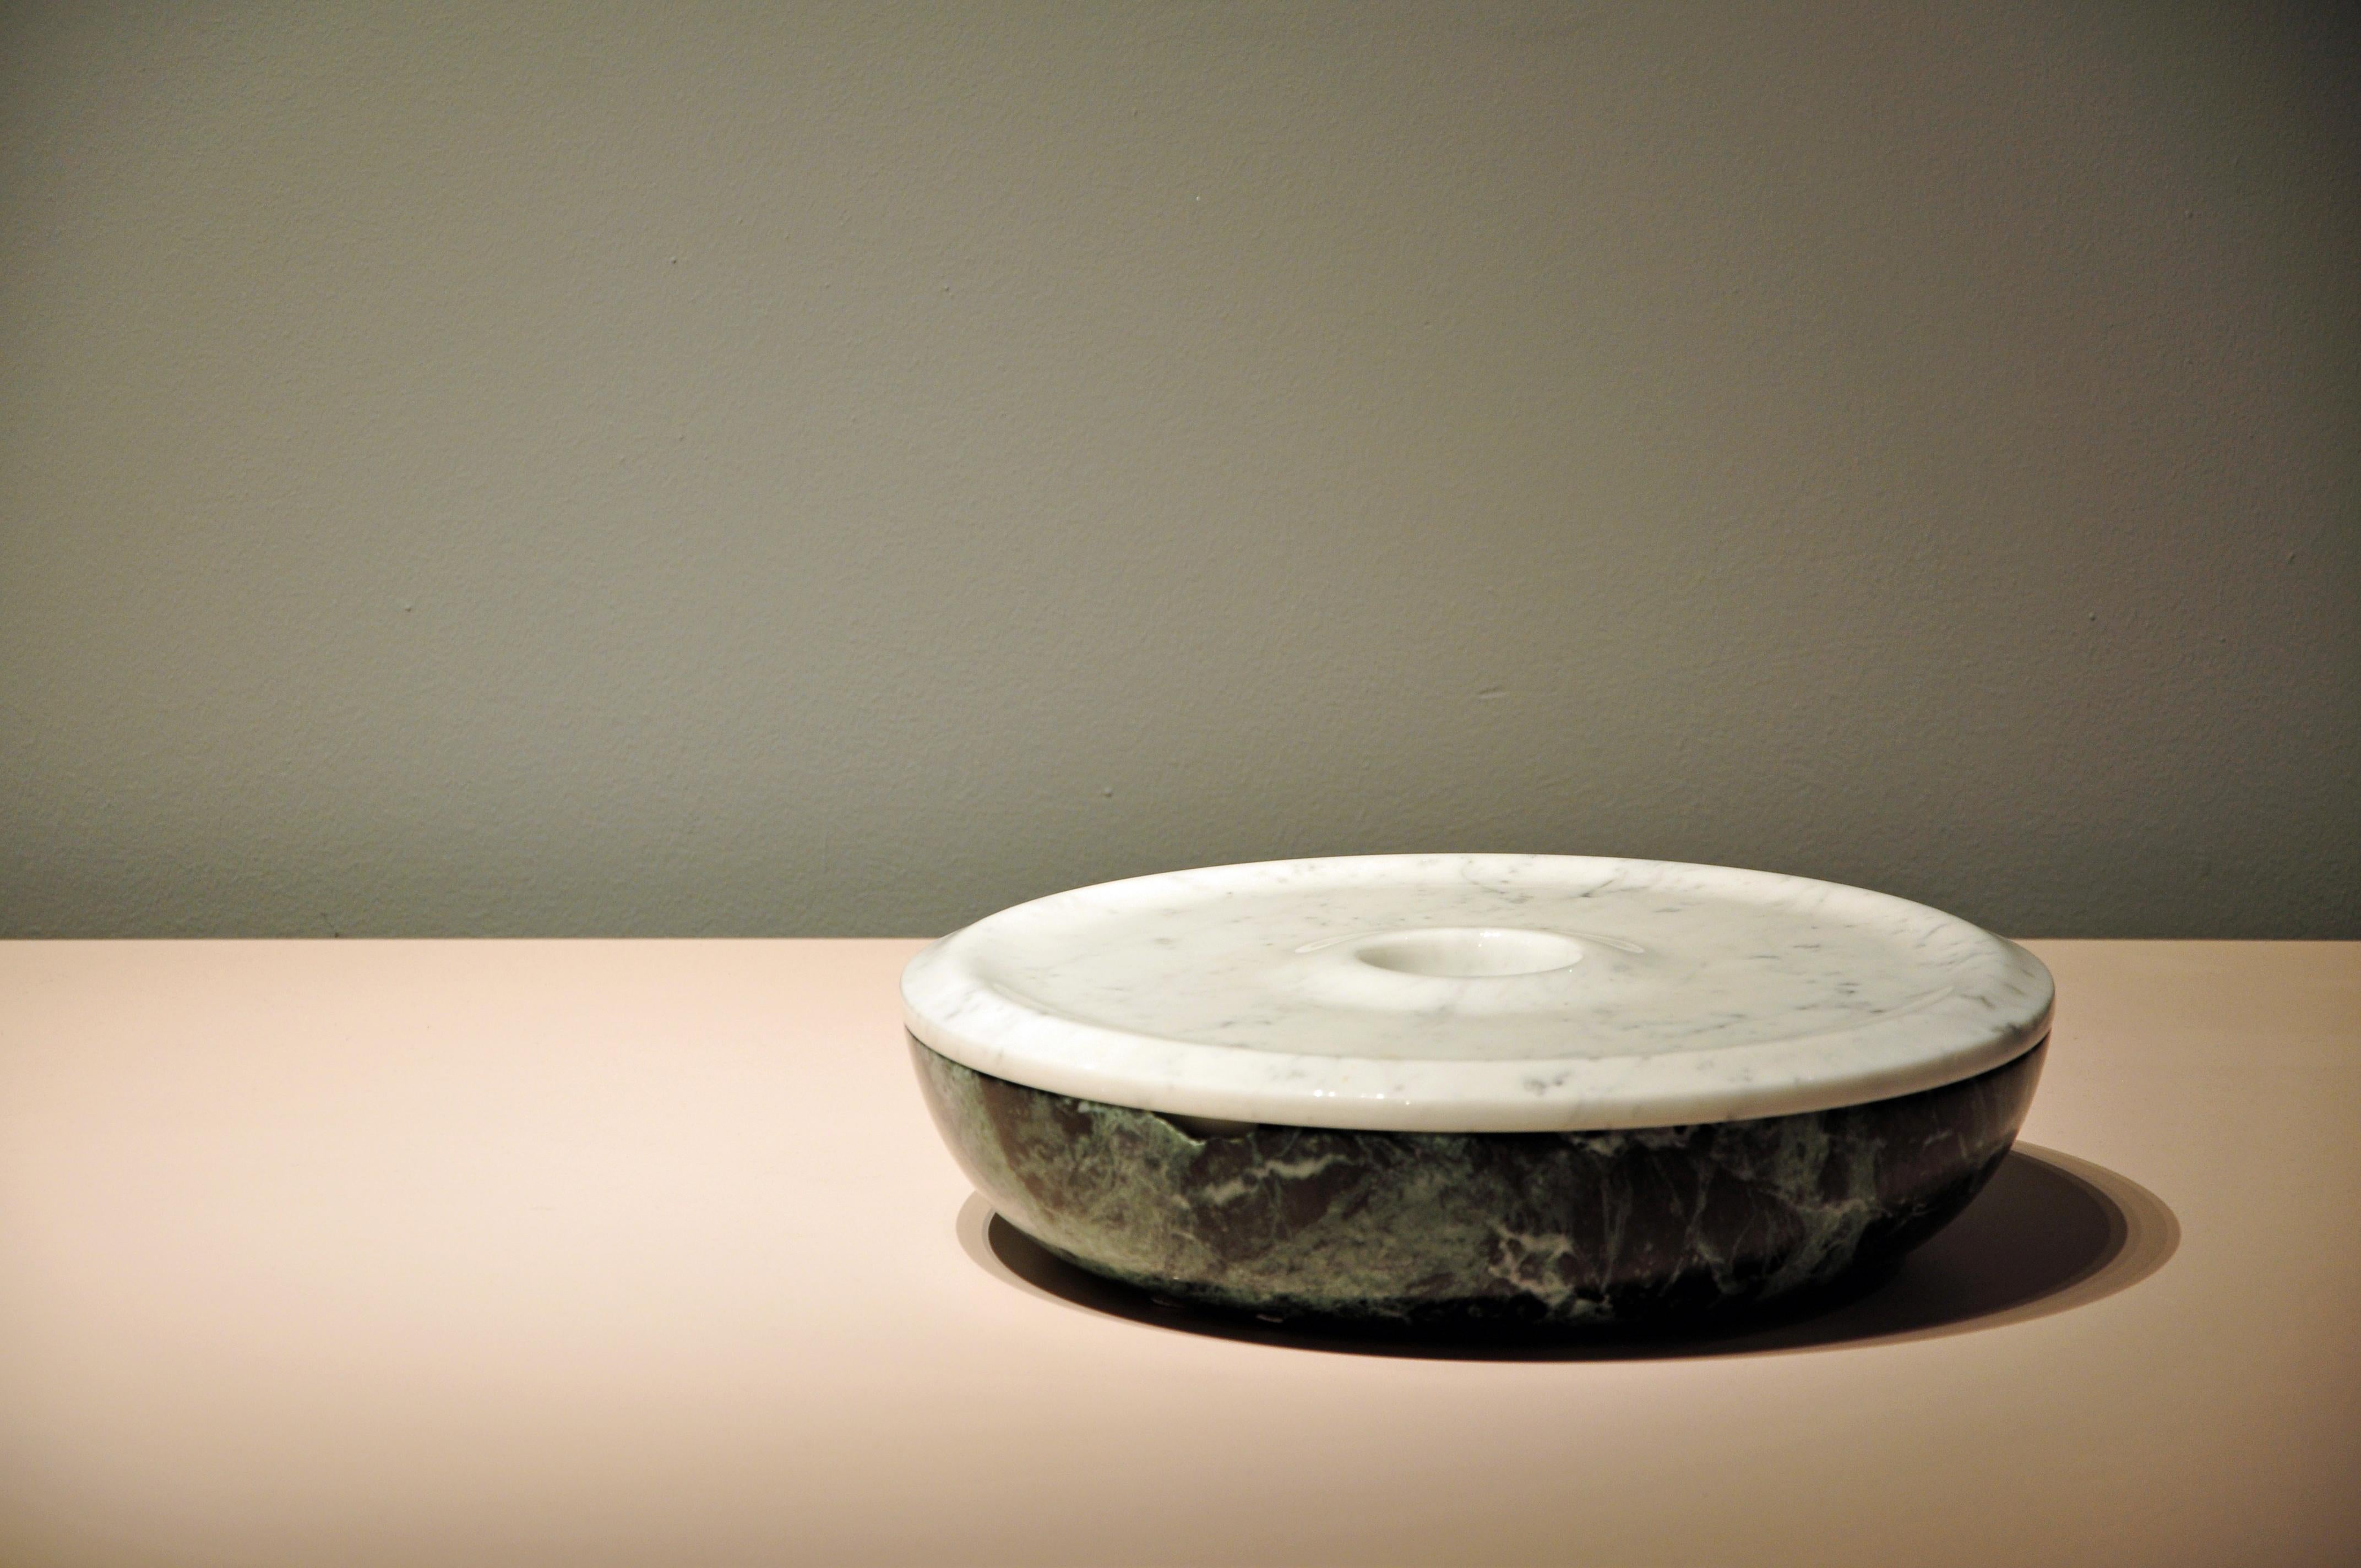 The bowl is also a candlestick. The lid can be removed and turns the candleholder into a bowl. Torsten Neeland's design approach is clear and direct. He believes that simplicity is very often the result of a complex process that is very much linked